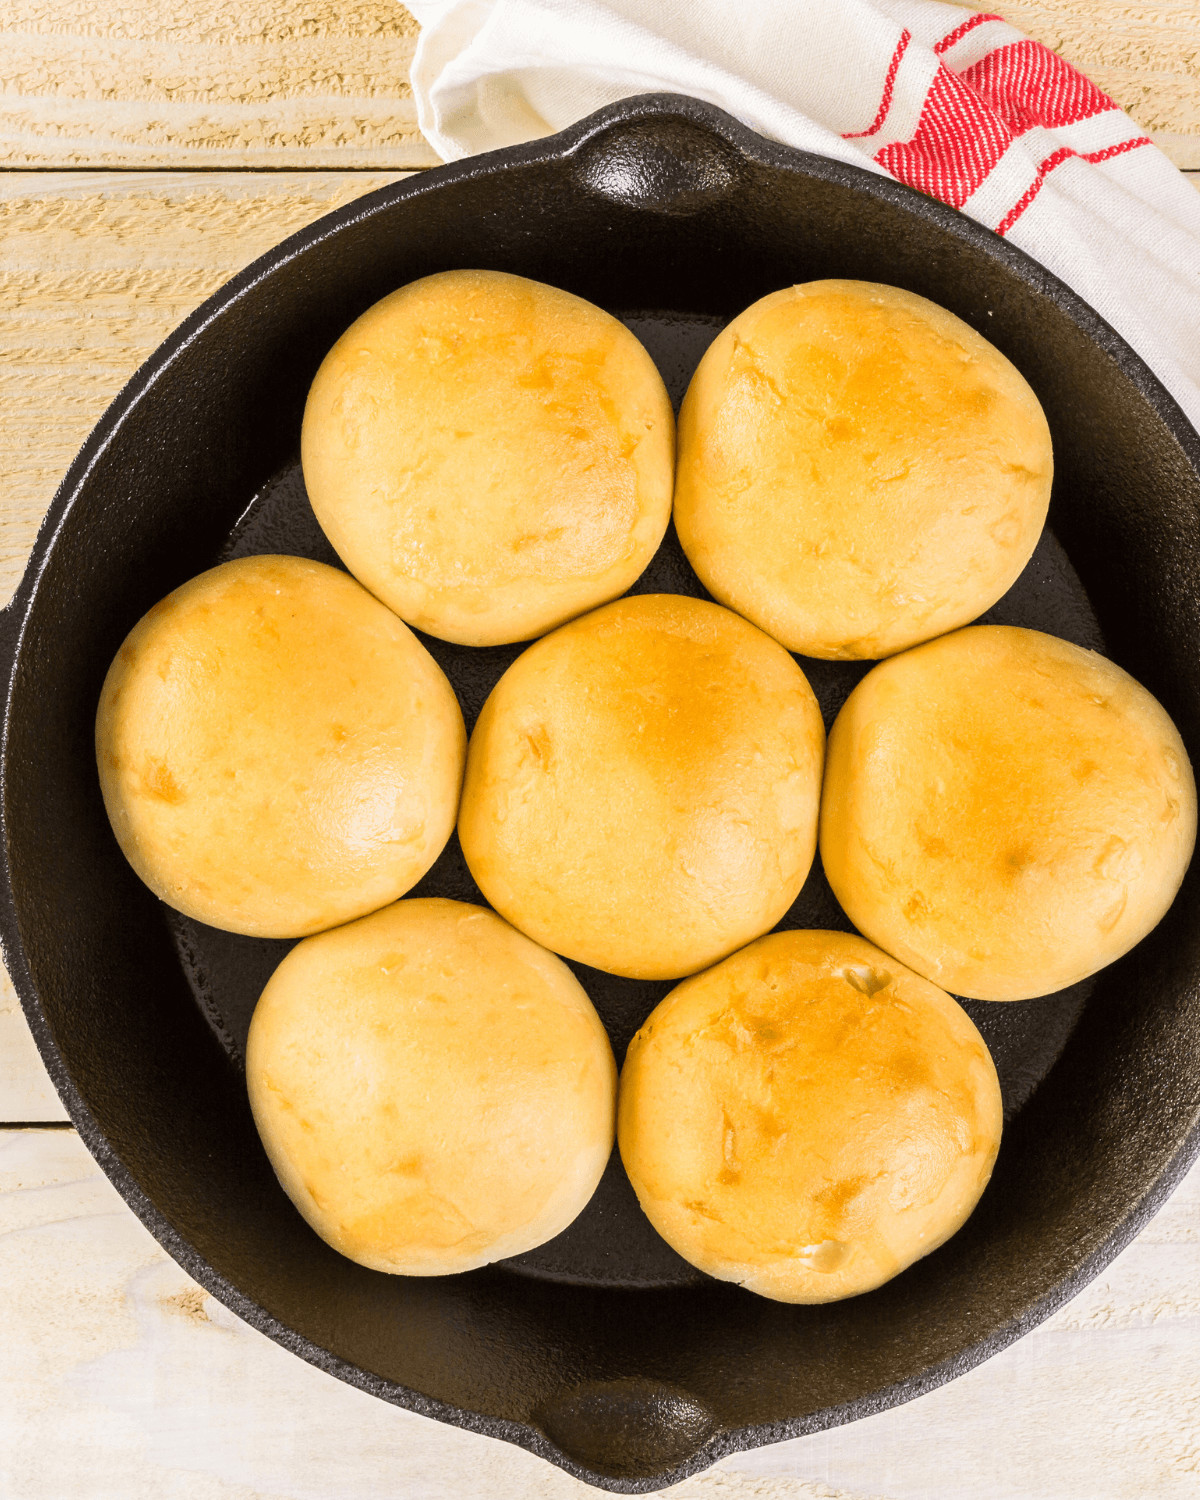 The finished no knead rolls in a cast iron pan.